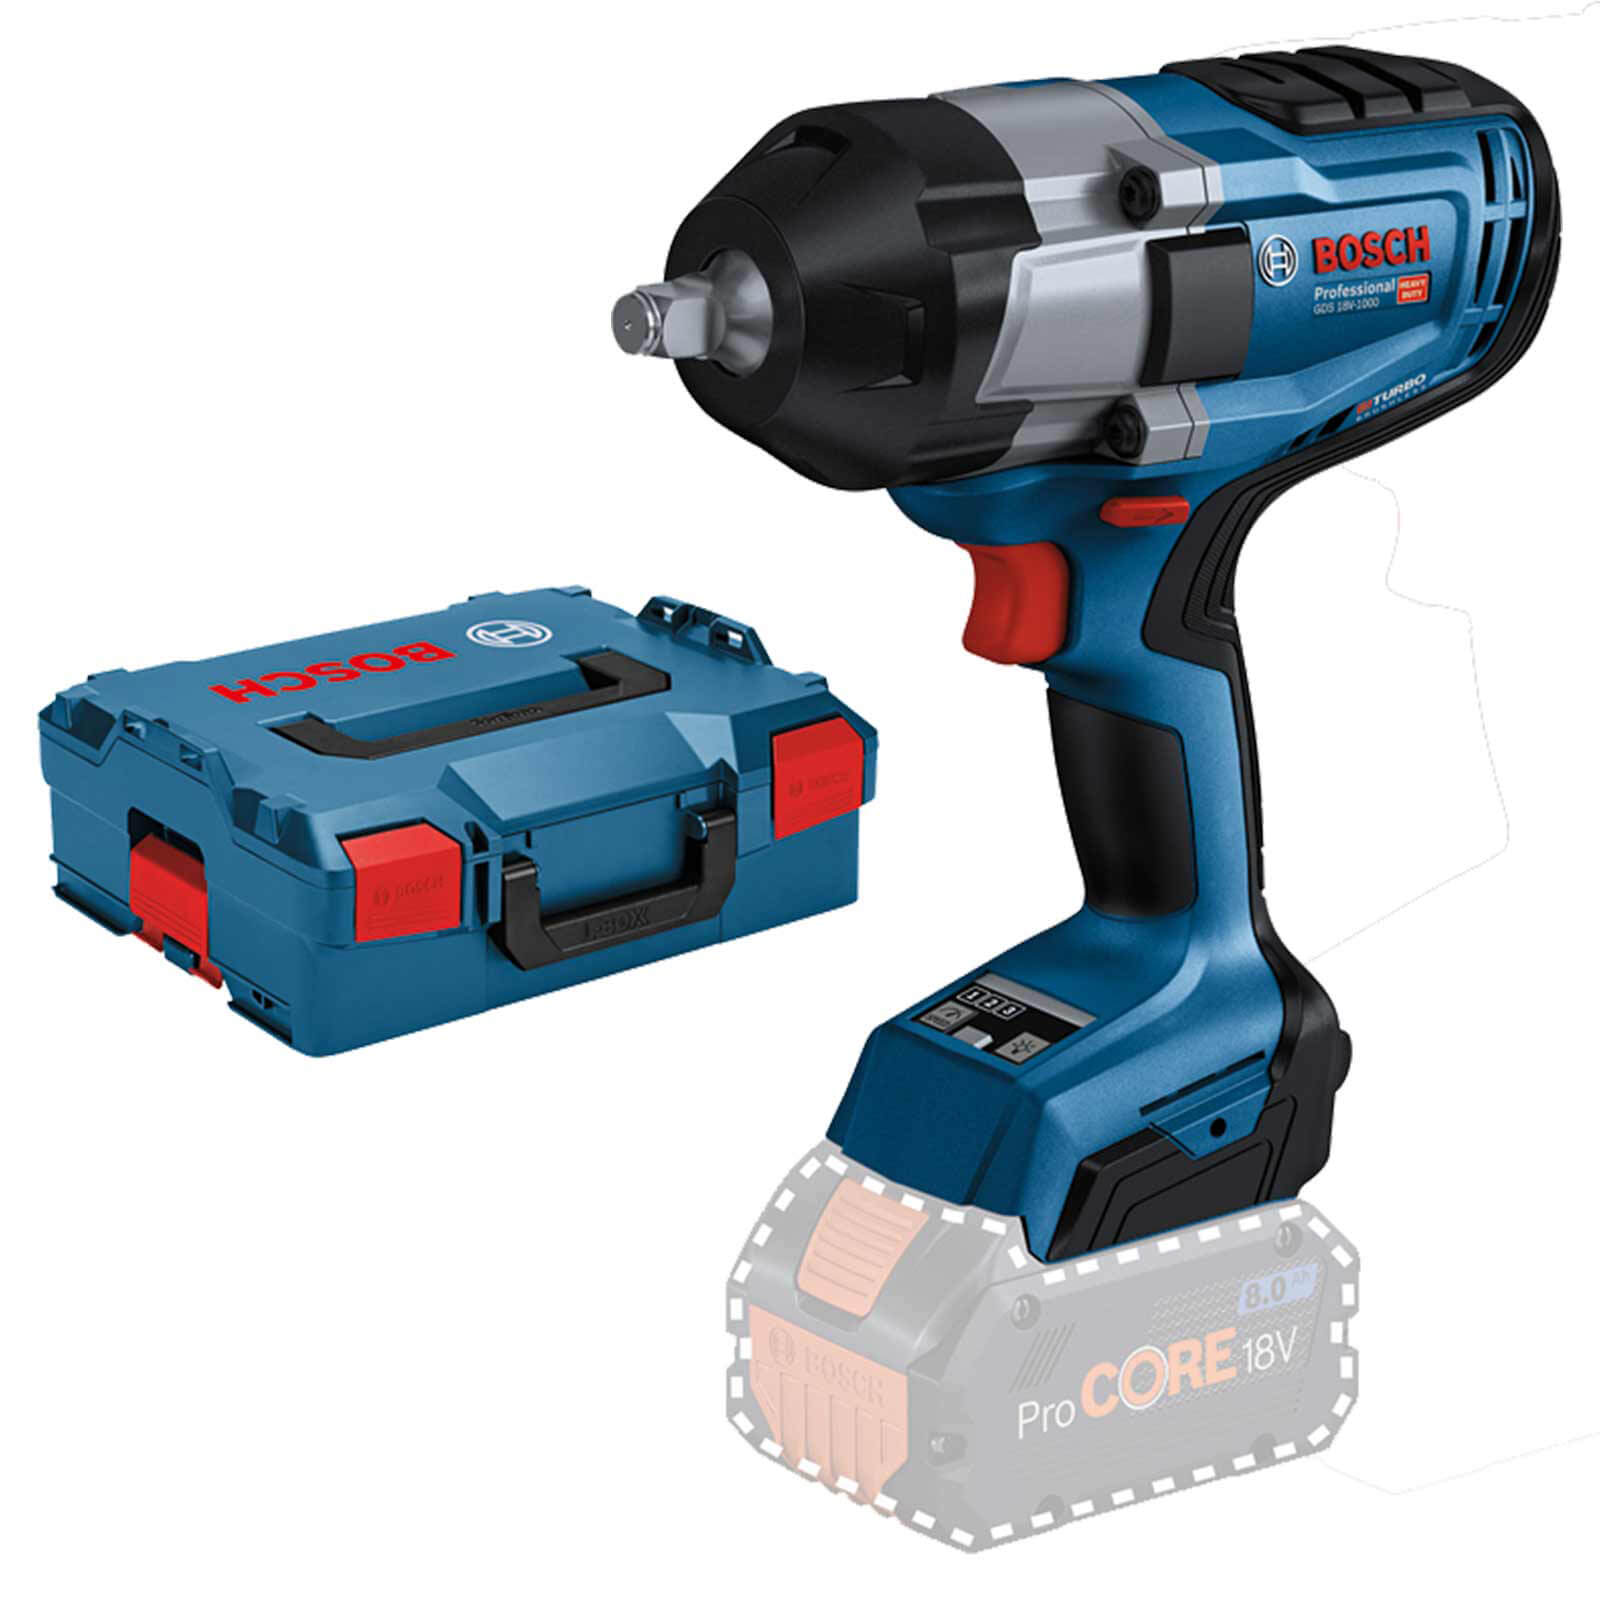 Photo of Bosch Gds 18v-1000 Biturbo 18v Cordless Brushless High Torque ½” Drive Impact Wrench No Batteries No Charger Case